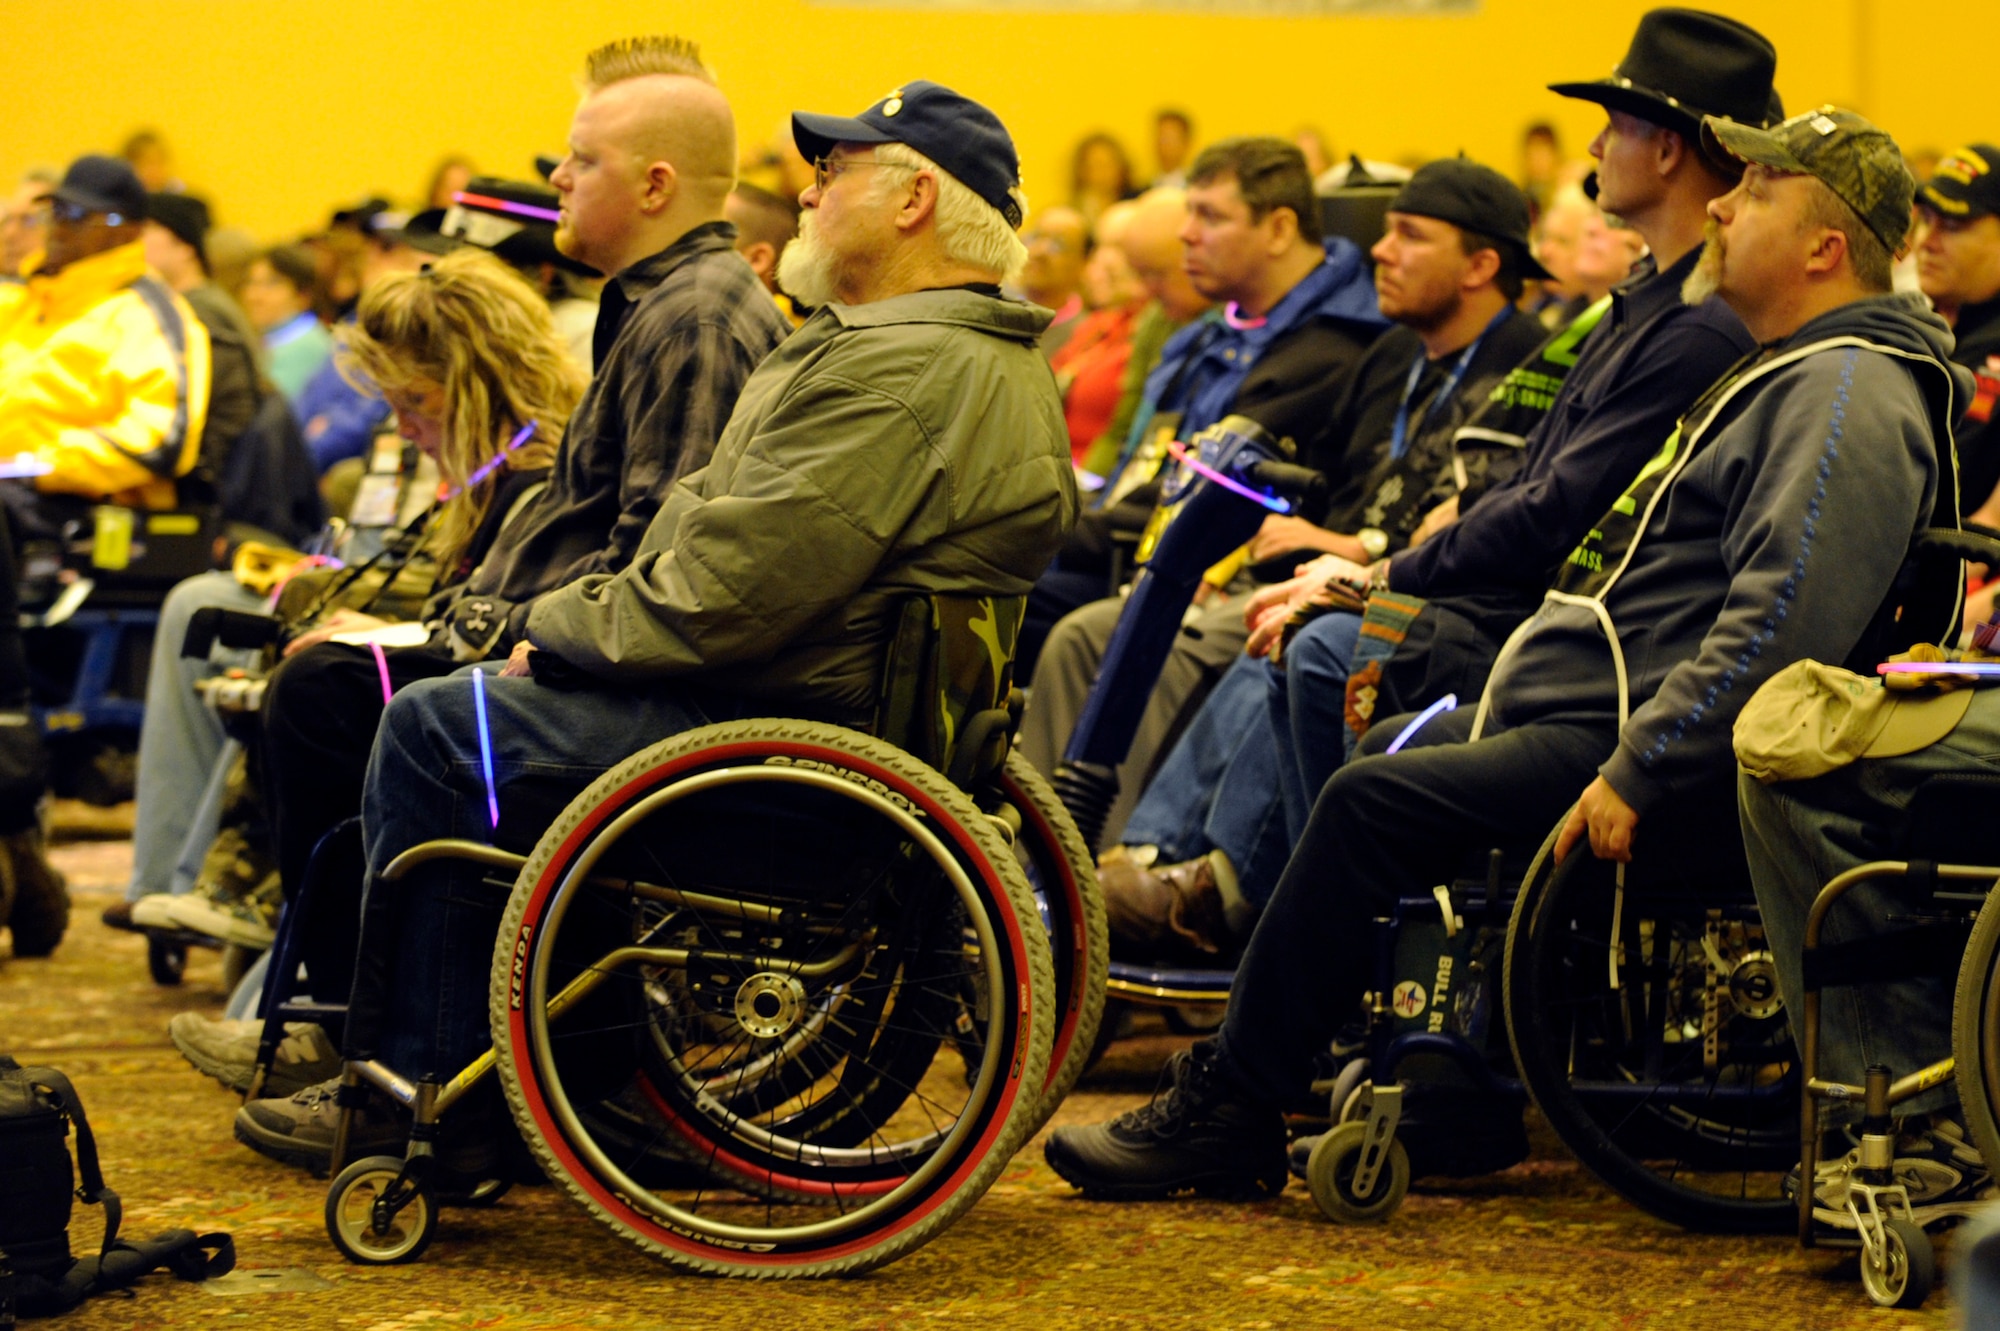 Veterans attend the opening ceremony inside The Silver Tree Hotel March 29 for the 23rd National Disabled American Veterans Winter Sports Clinic in Snowmass Village, Colo. The event is sponsored by the Department of Veterans Affairs and Disabled American Veterans. (U.S. Air Force photo/Staff Sgt. Desiree N. Palacios)